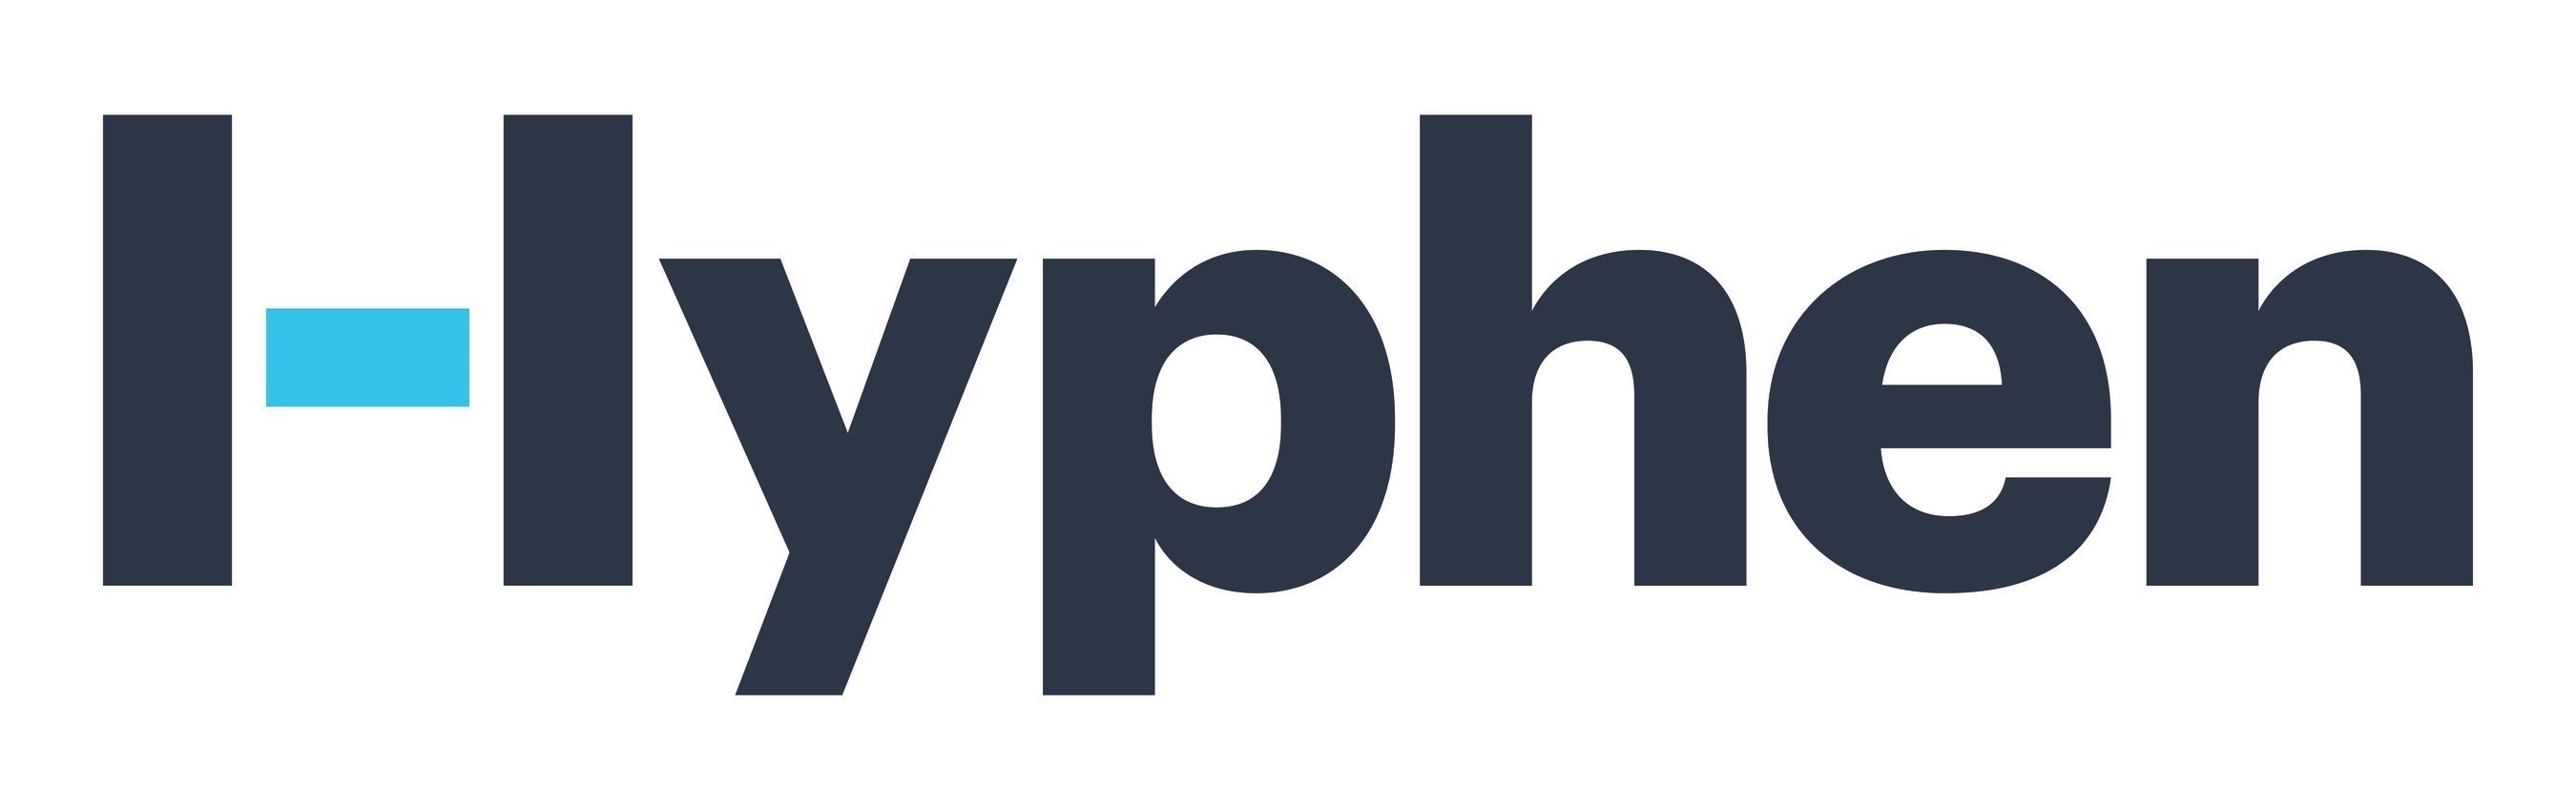 Live Life at Your Peak with Hyphen